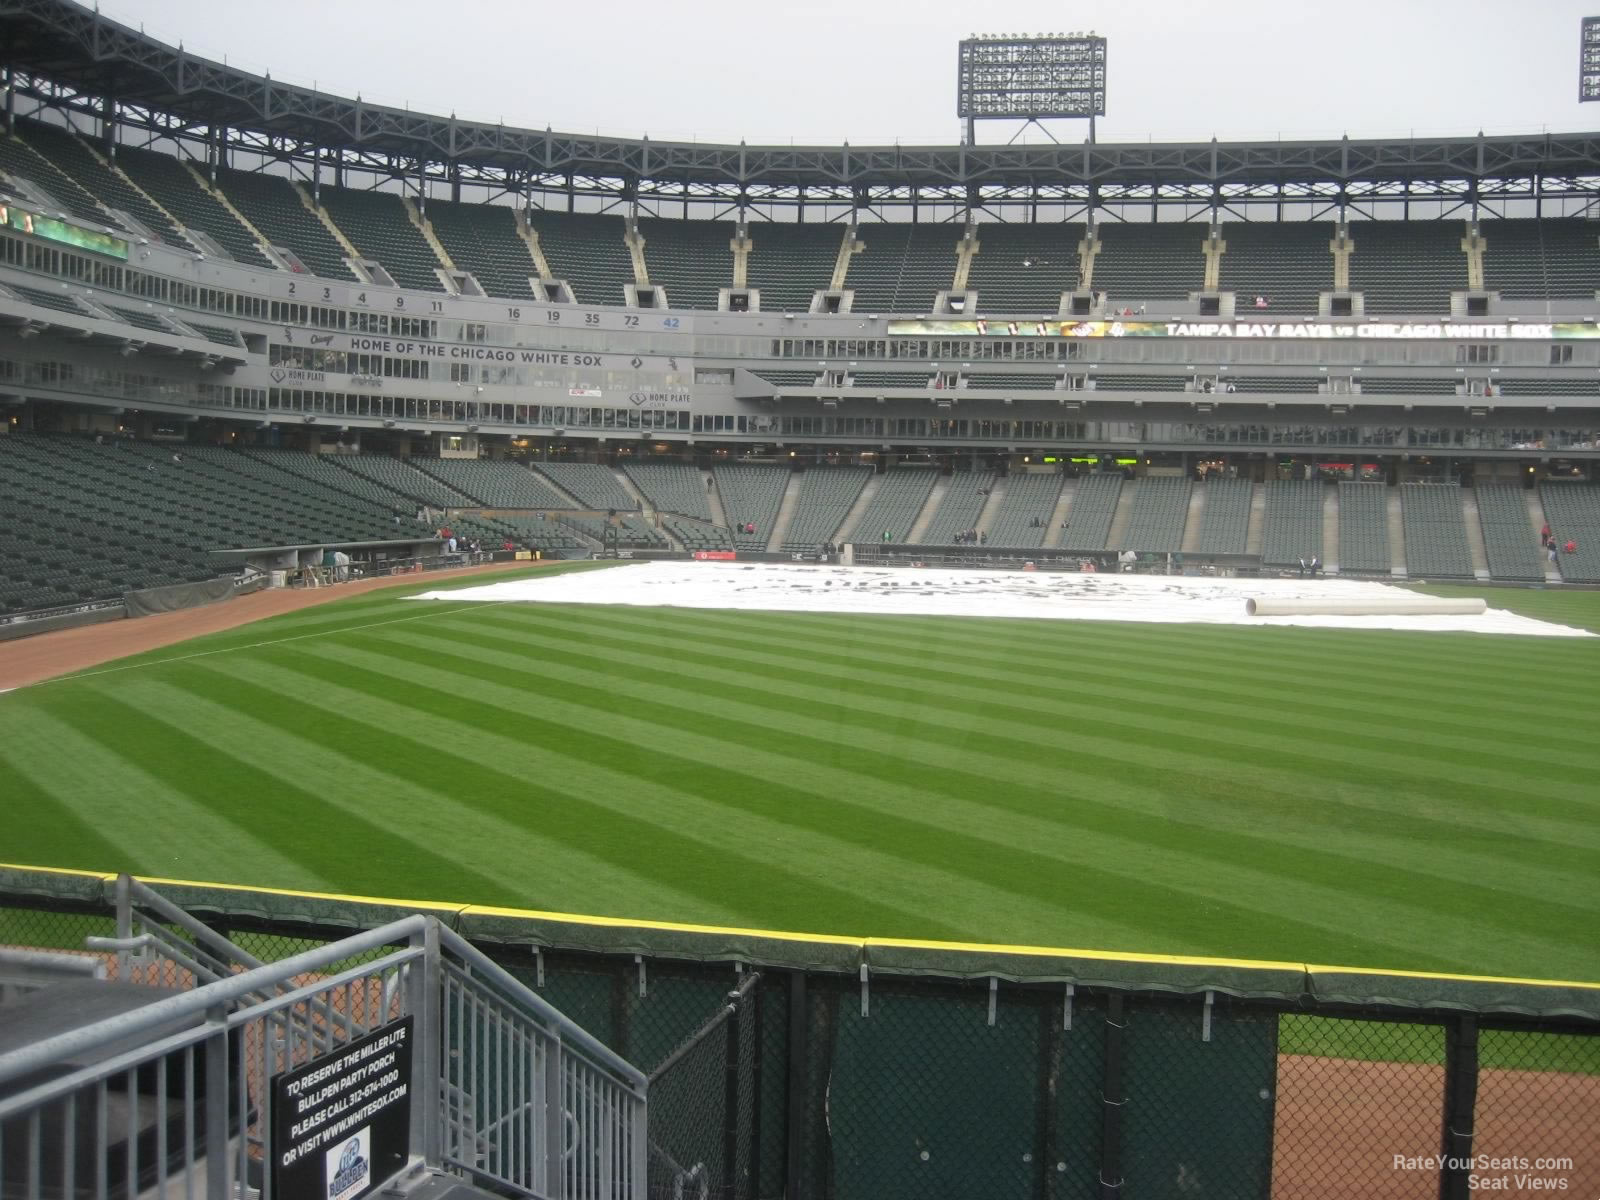 Guaranteed Rate Field, section 105, home of Chicago White Sox, page 1